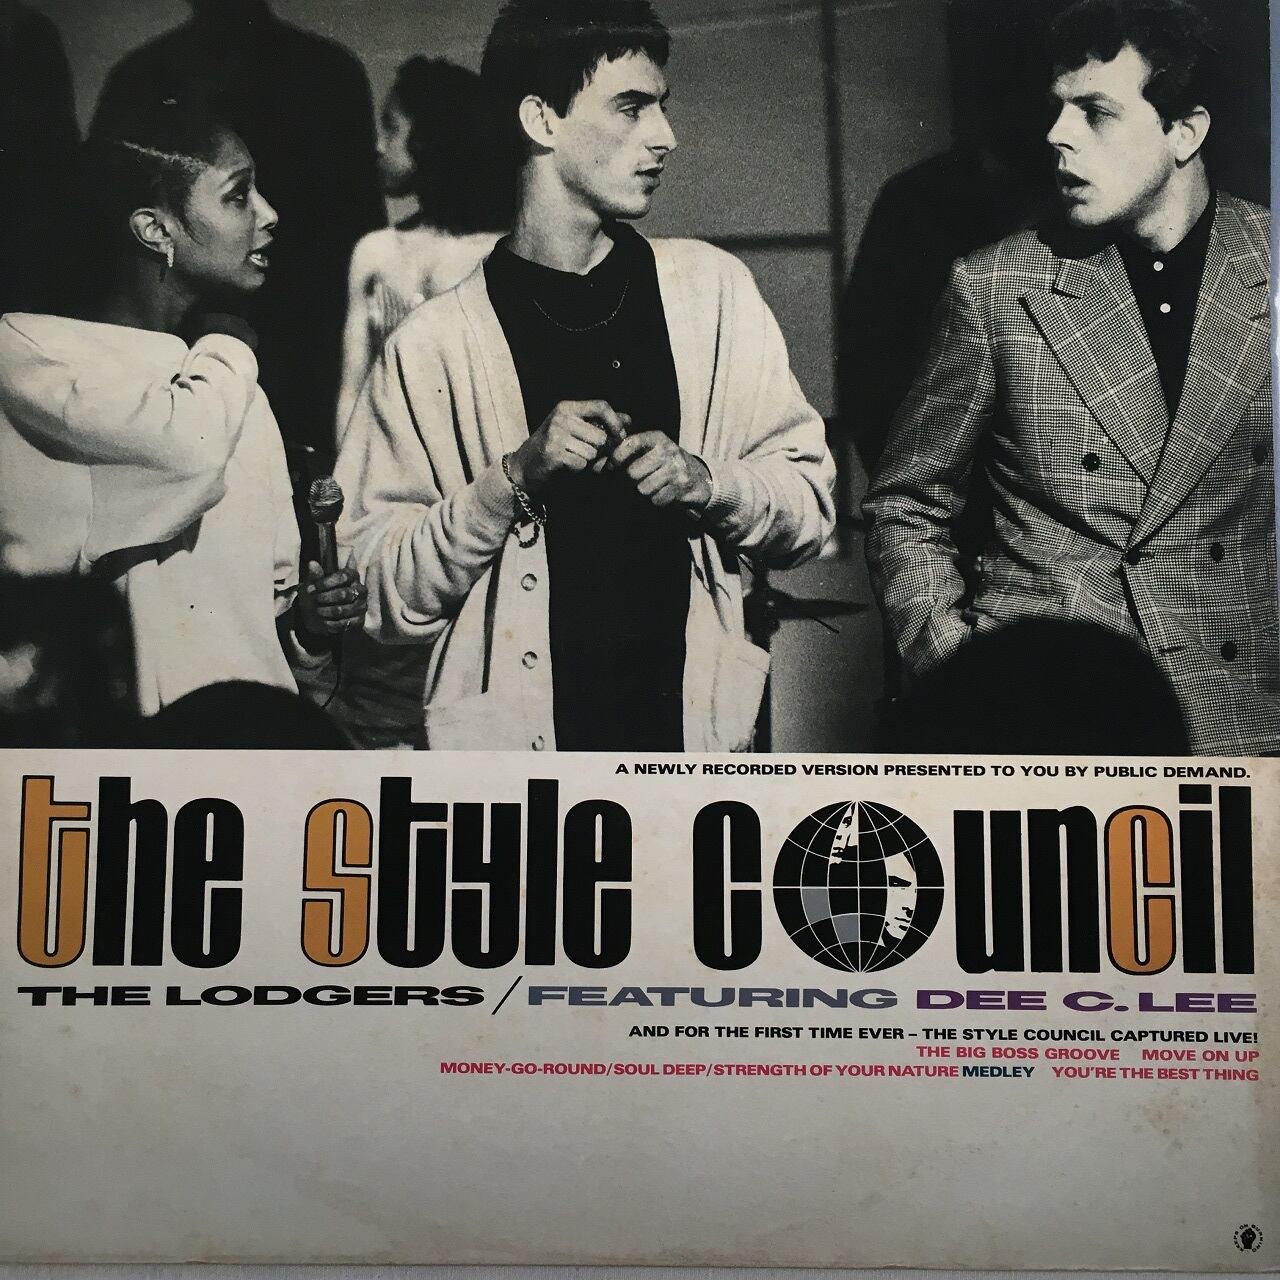 【12EP】The Style Council featuring Dee C. Lee – Lodges